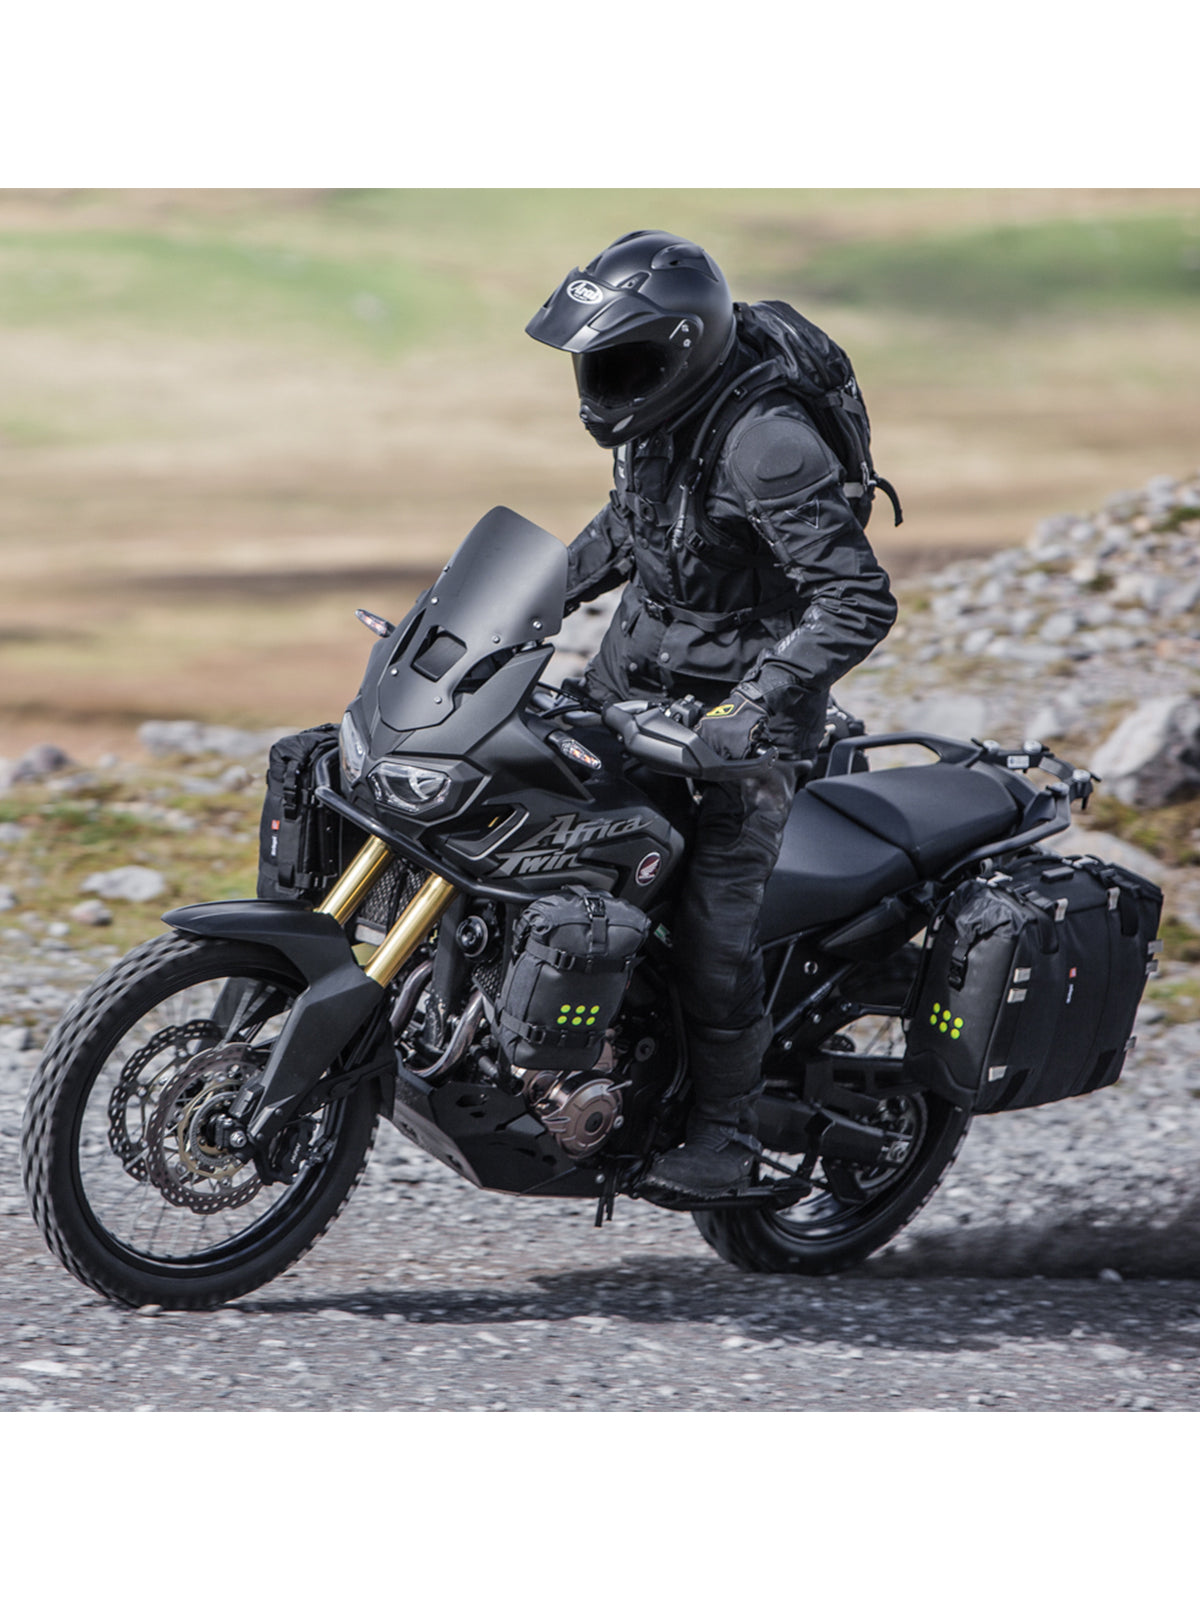 Kriega OS-6 Adventure Pack in action with rider